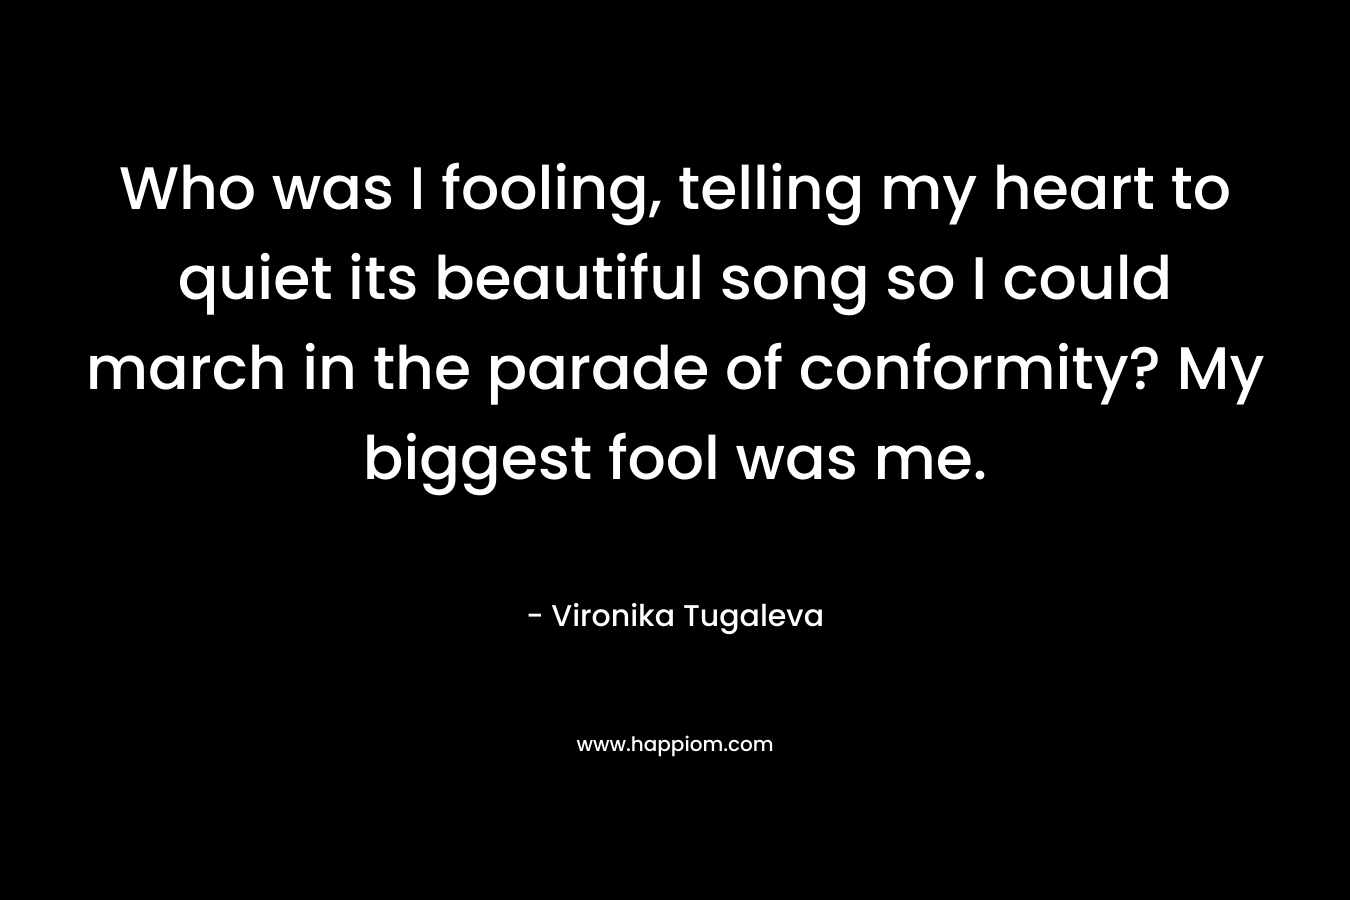 Who was I fooling, telling my heart to quiet its beautiful song so I could march in the parade of conformity? My biggest fool was me. – Vironika Tugaleva